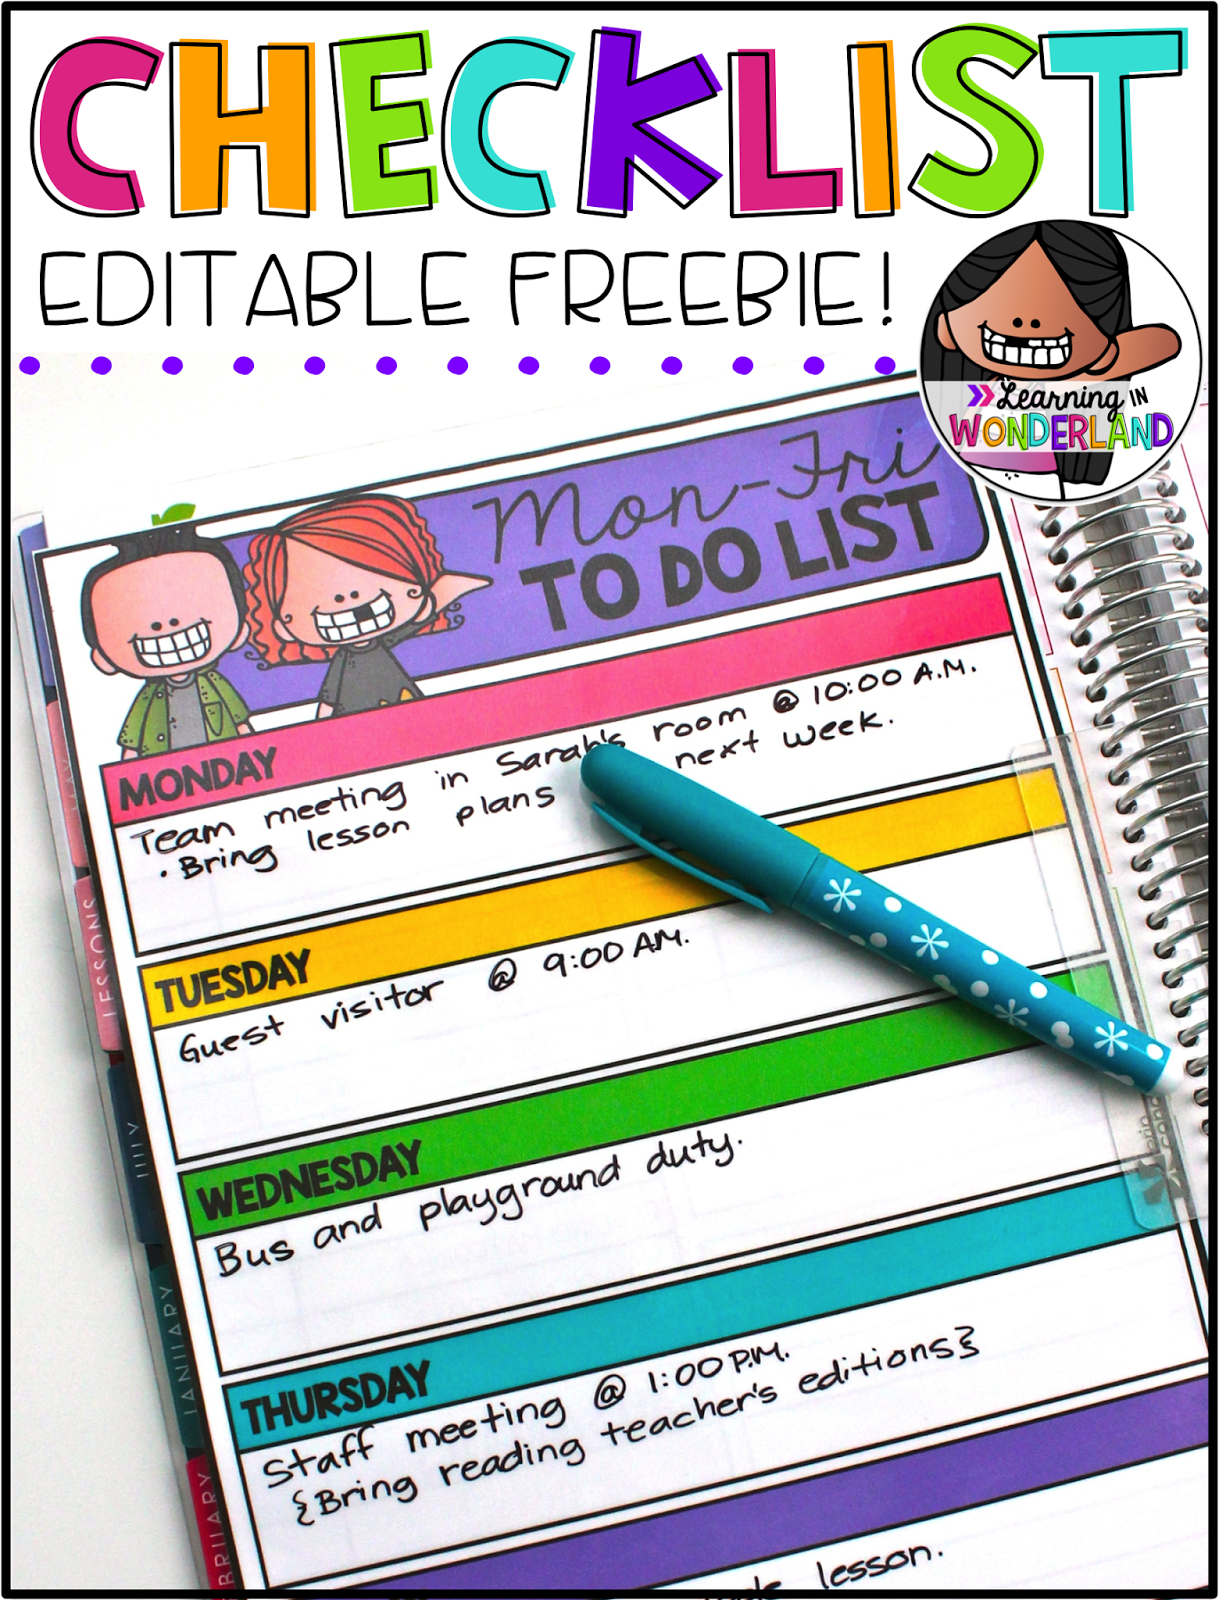 Get this cute checklist for FREE! Laminate it and put it into your planner to use every week!